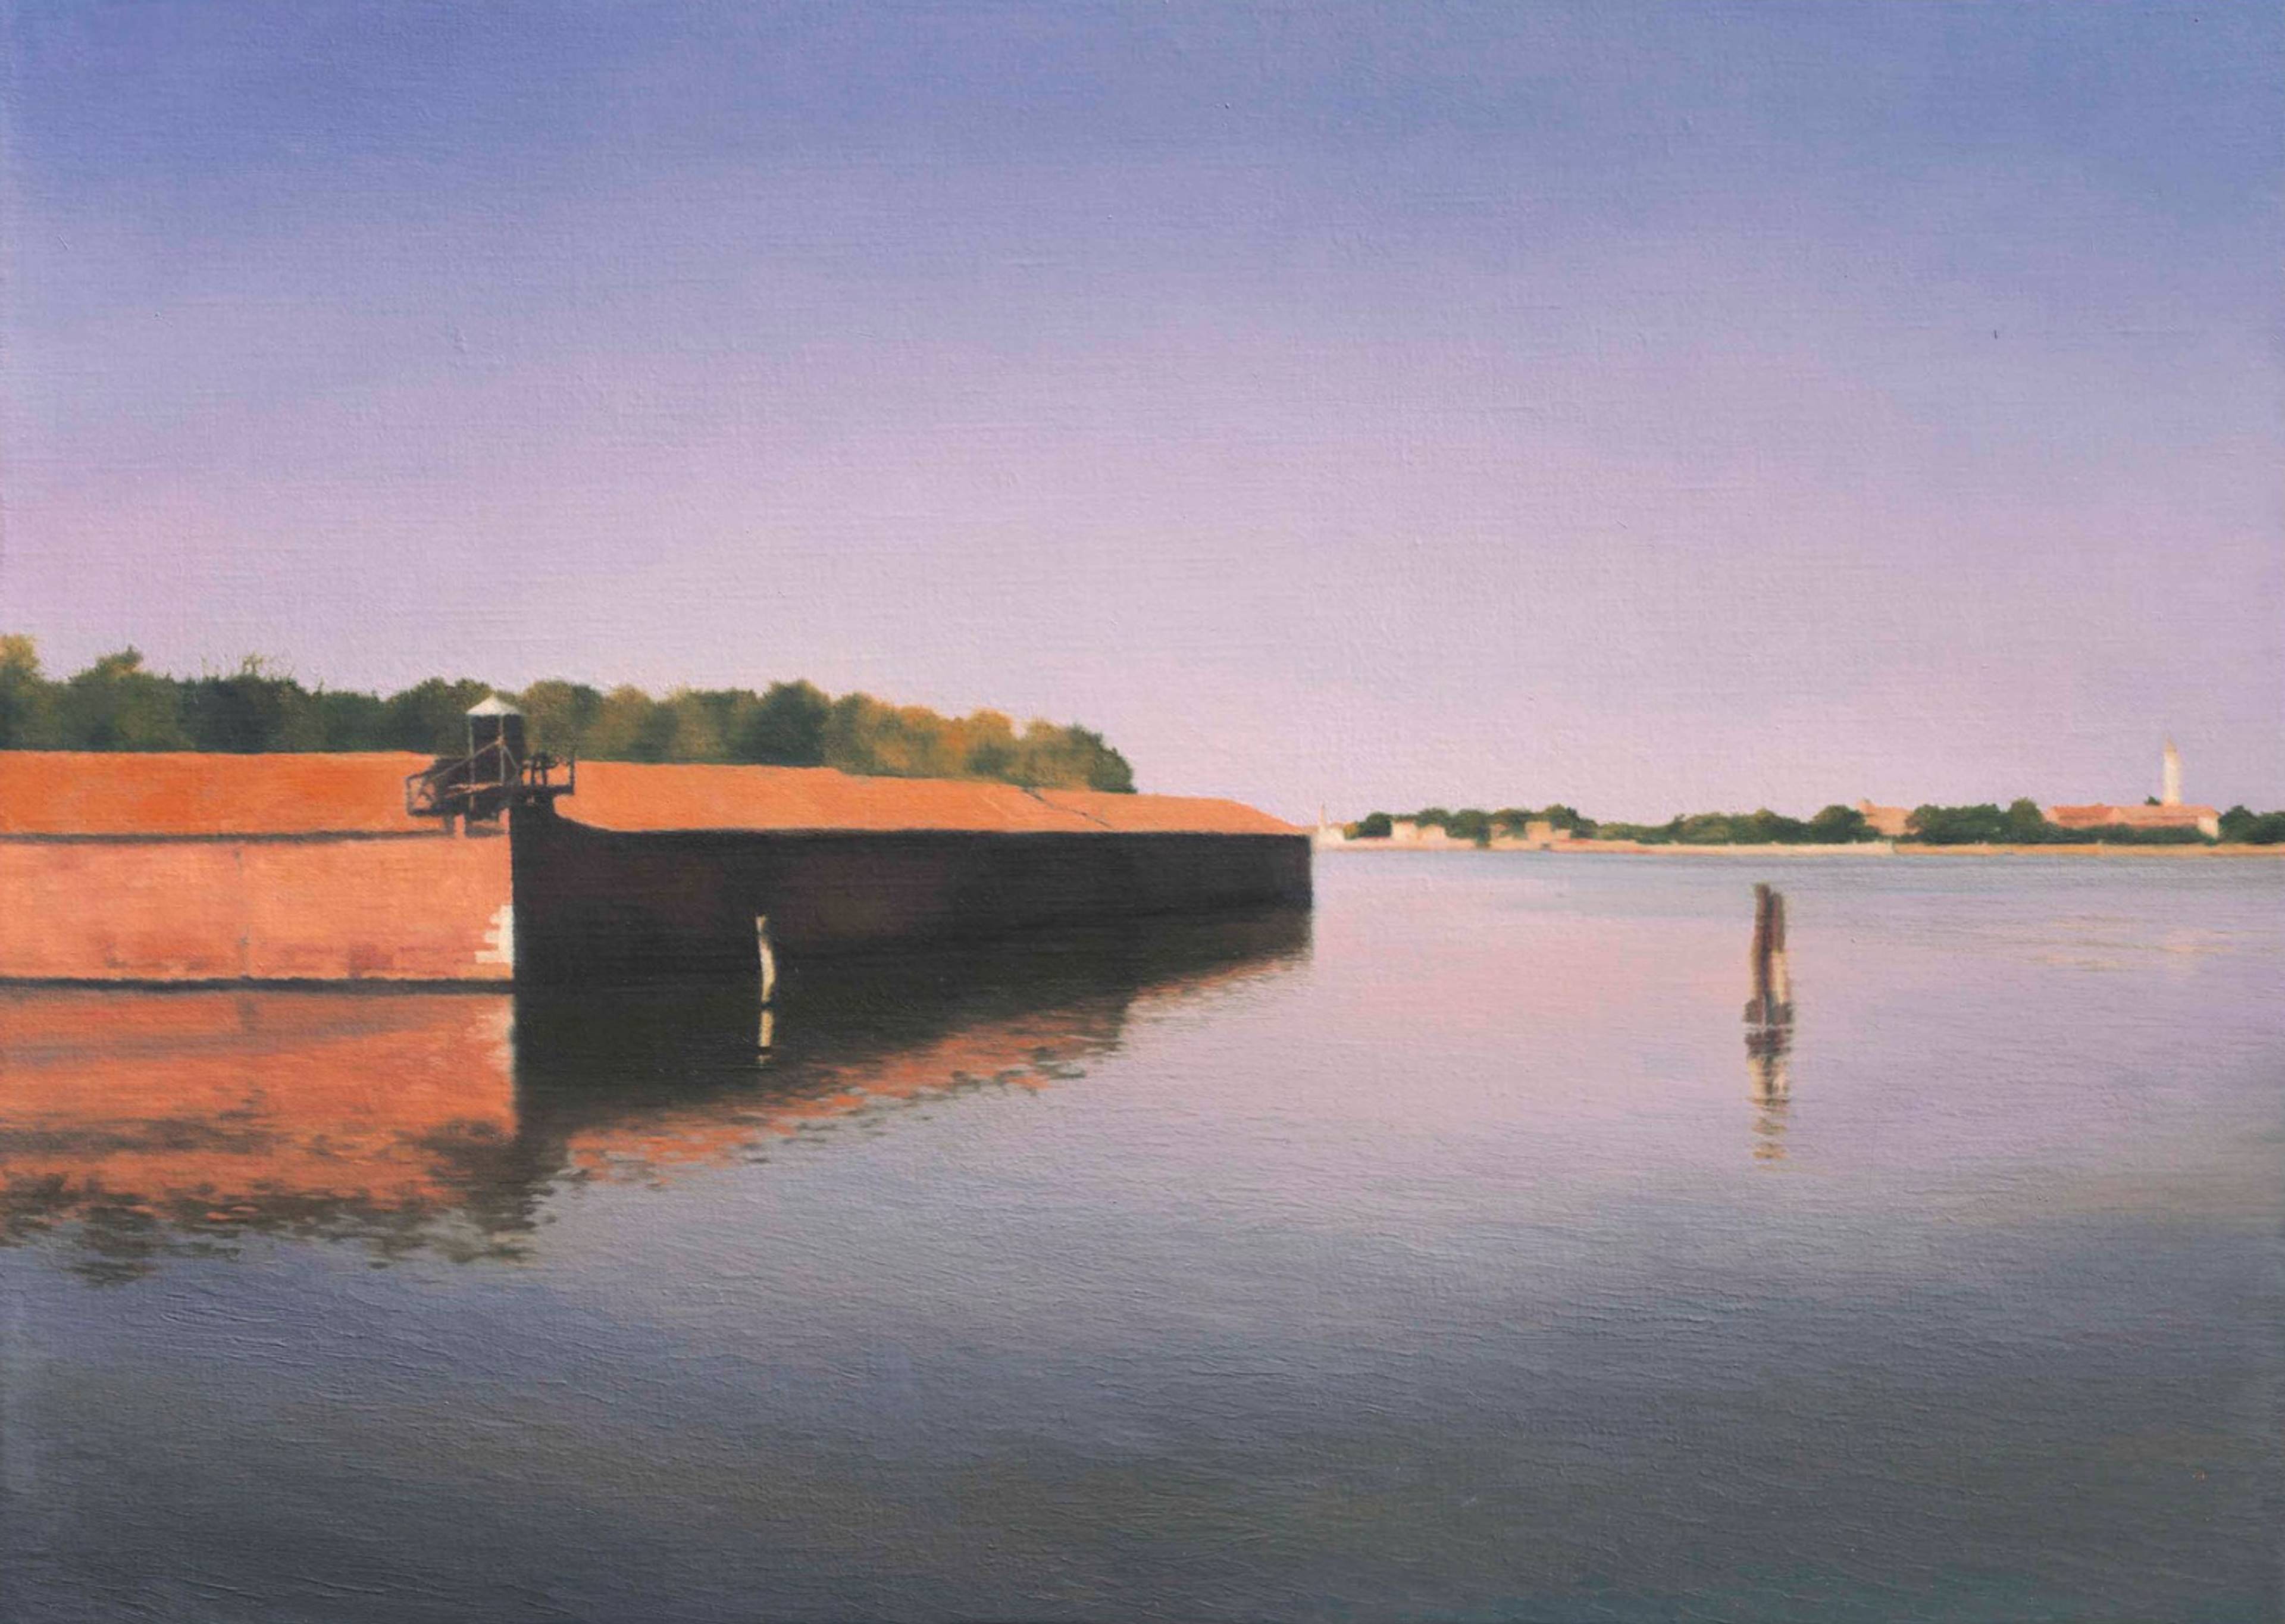 Photorealist painting by Gerhard Richter, depicting the shimmering waters which are a gateway to Venice. The warm glow of twilight from the sky is reflected in the blue water.